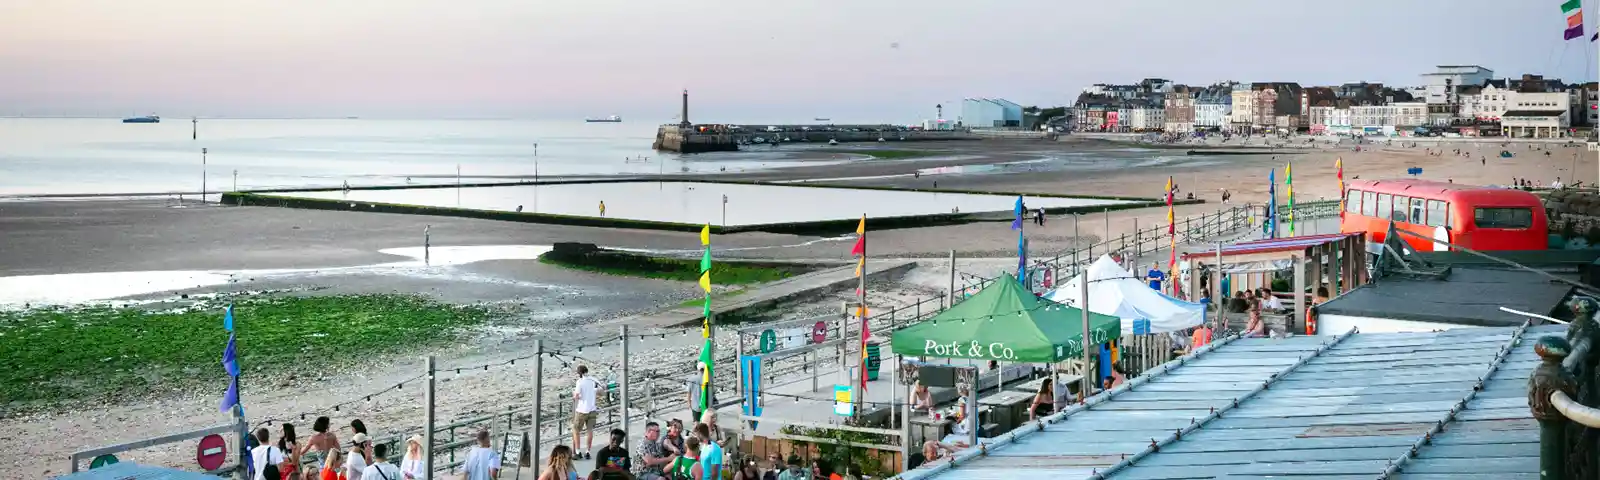 EDITED The Sun Deck, Margate By Alex Hare 2023 Food And Drink Credit Tourism @ Thanet District Council S5 8814